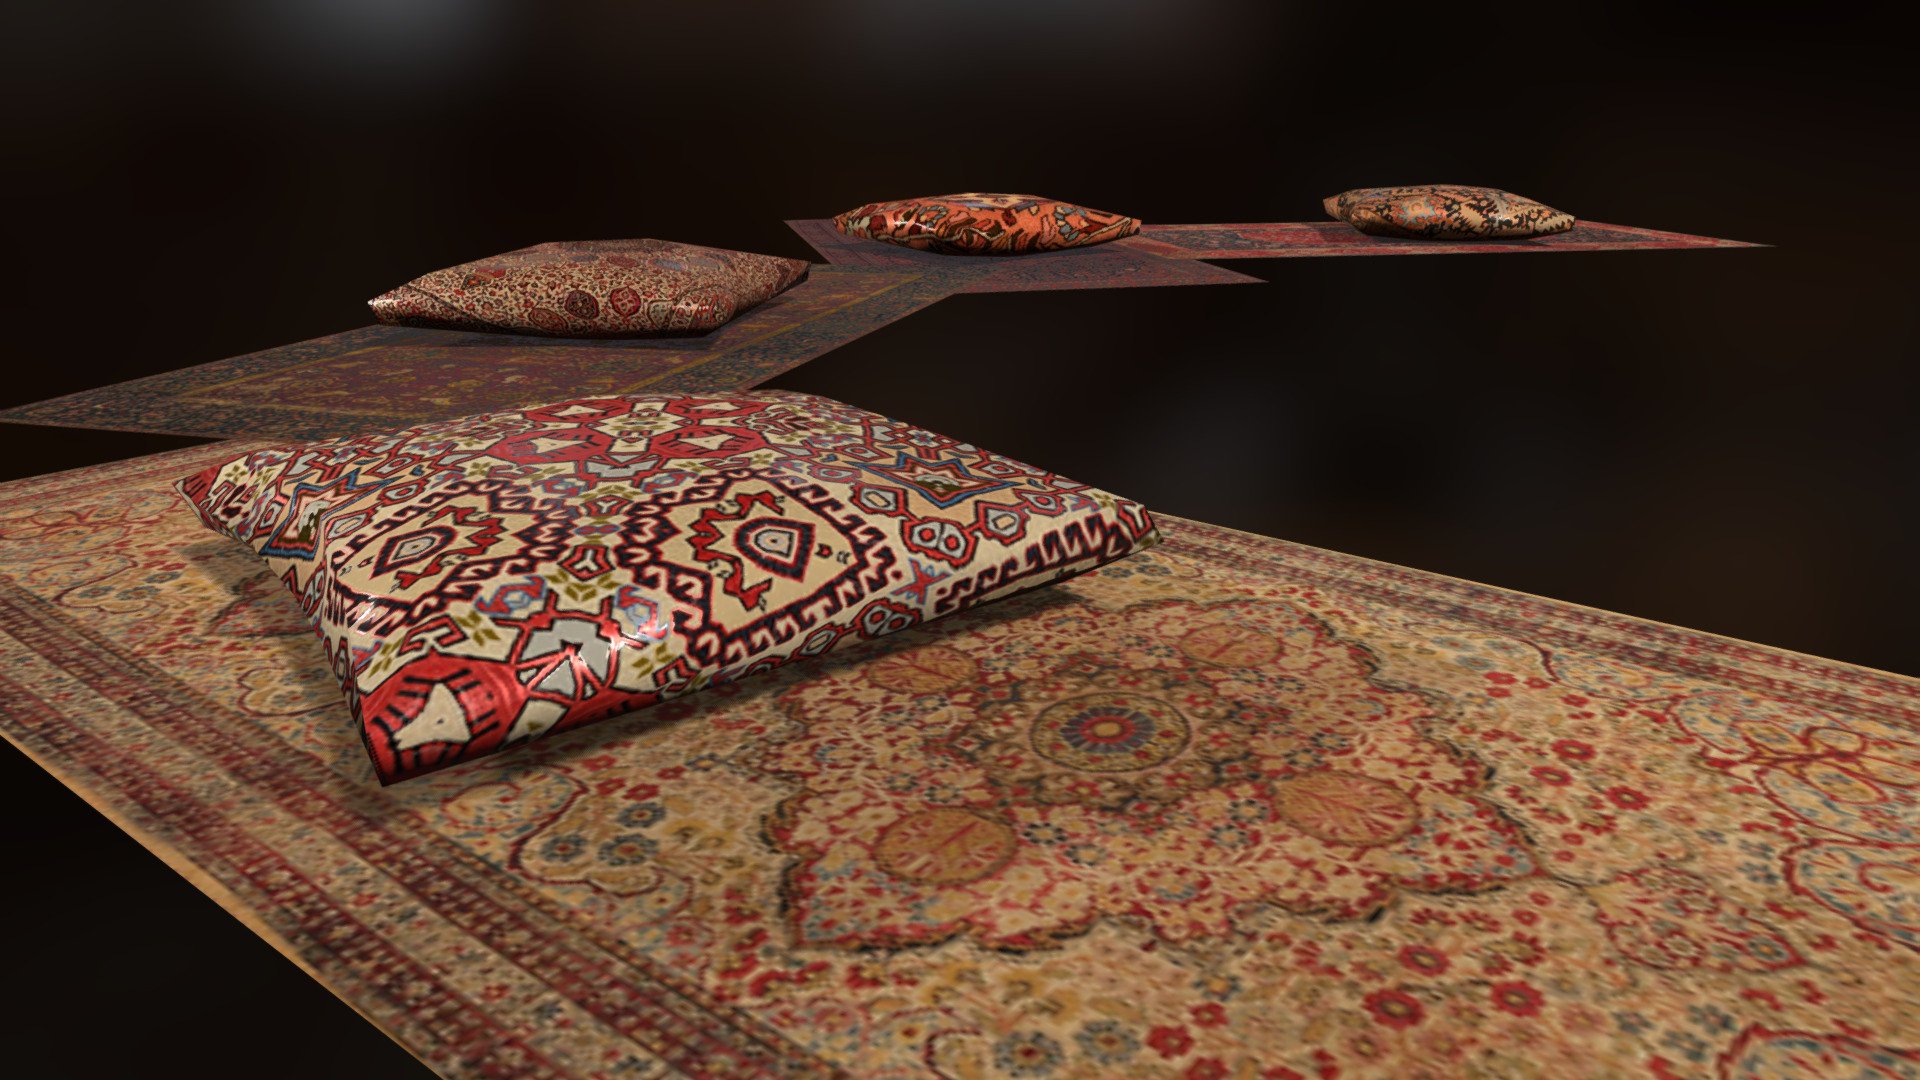 Some pillow and carpets for the Ottoman Table. Project for a Unity game.

I remade the model and textures after some time, making two materials instead of one, and working in total PBR.

March 2020 : Another edit was made. This time, I did propre 3D models, and still using the same public domain pictures, was able to do a more correct scene. Here : https://sketchfab.com/3d-models/ottoman-pillow-and-carpets-v2-58b855b5e2f34e42b9670e252c40c68a - Ottoman Pillow and Carpets - Download Free 3D model by gauvain_boiche 3d model